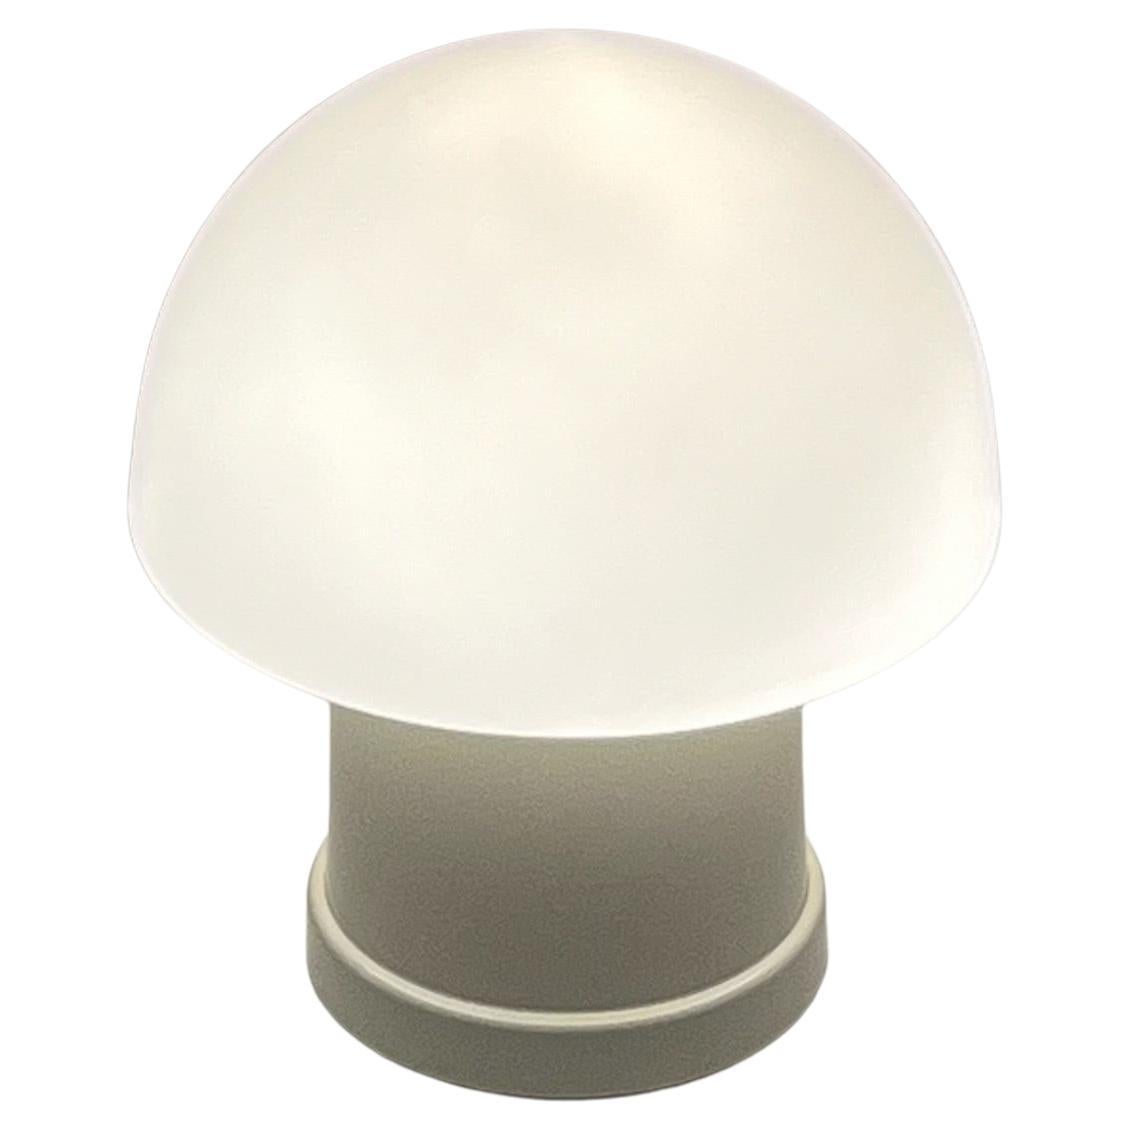 70s Space Age Mushroom Lamp - Iconic Design Charm by Massive Belgium For Sale